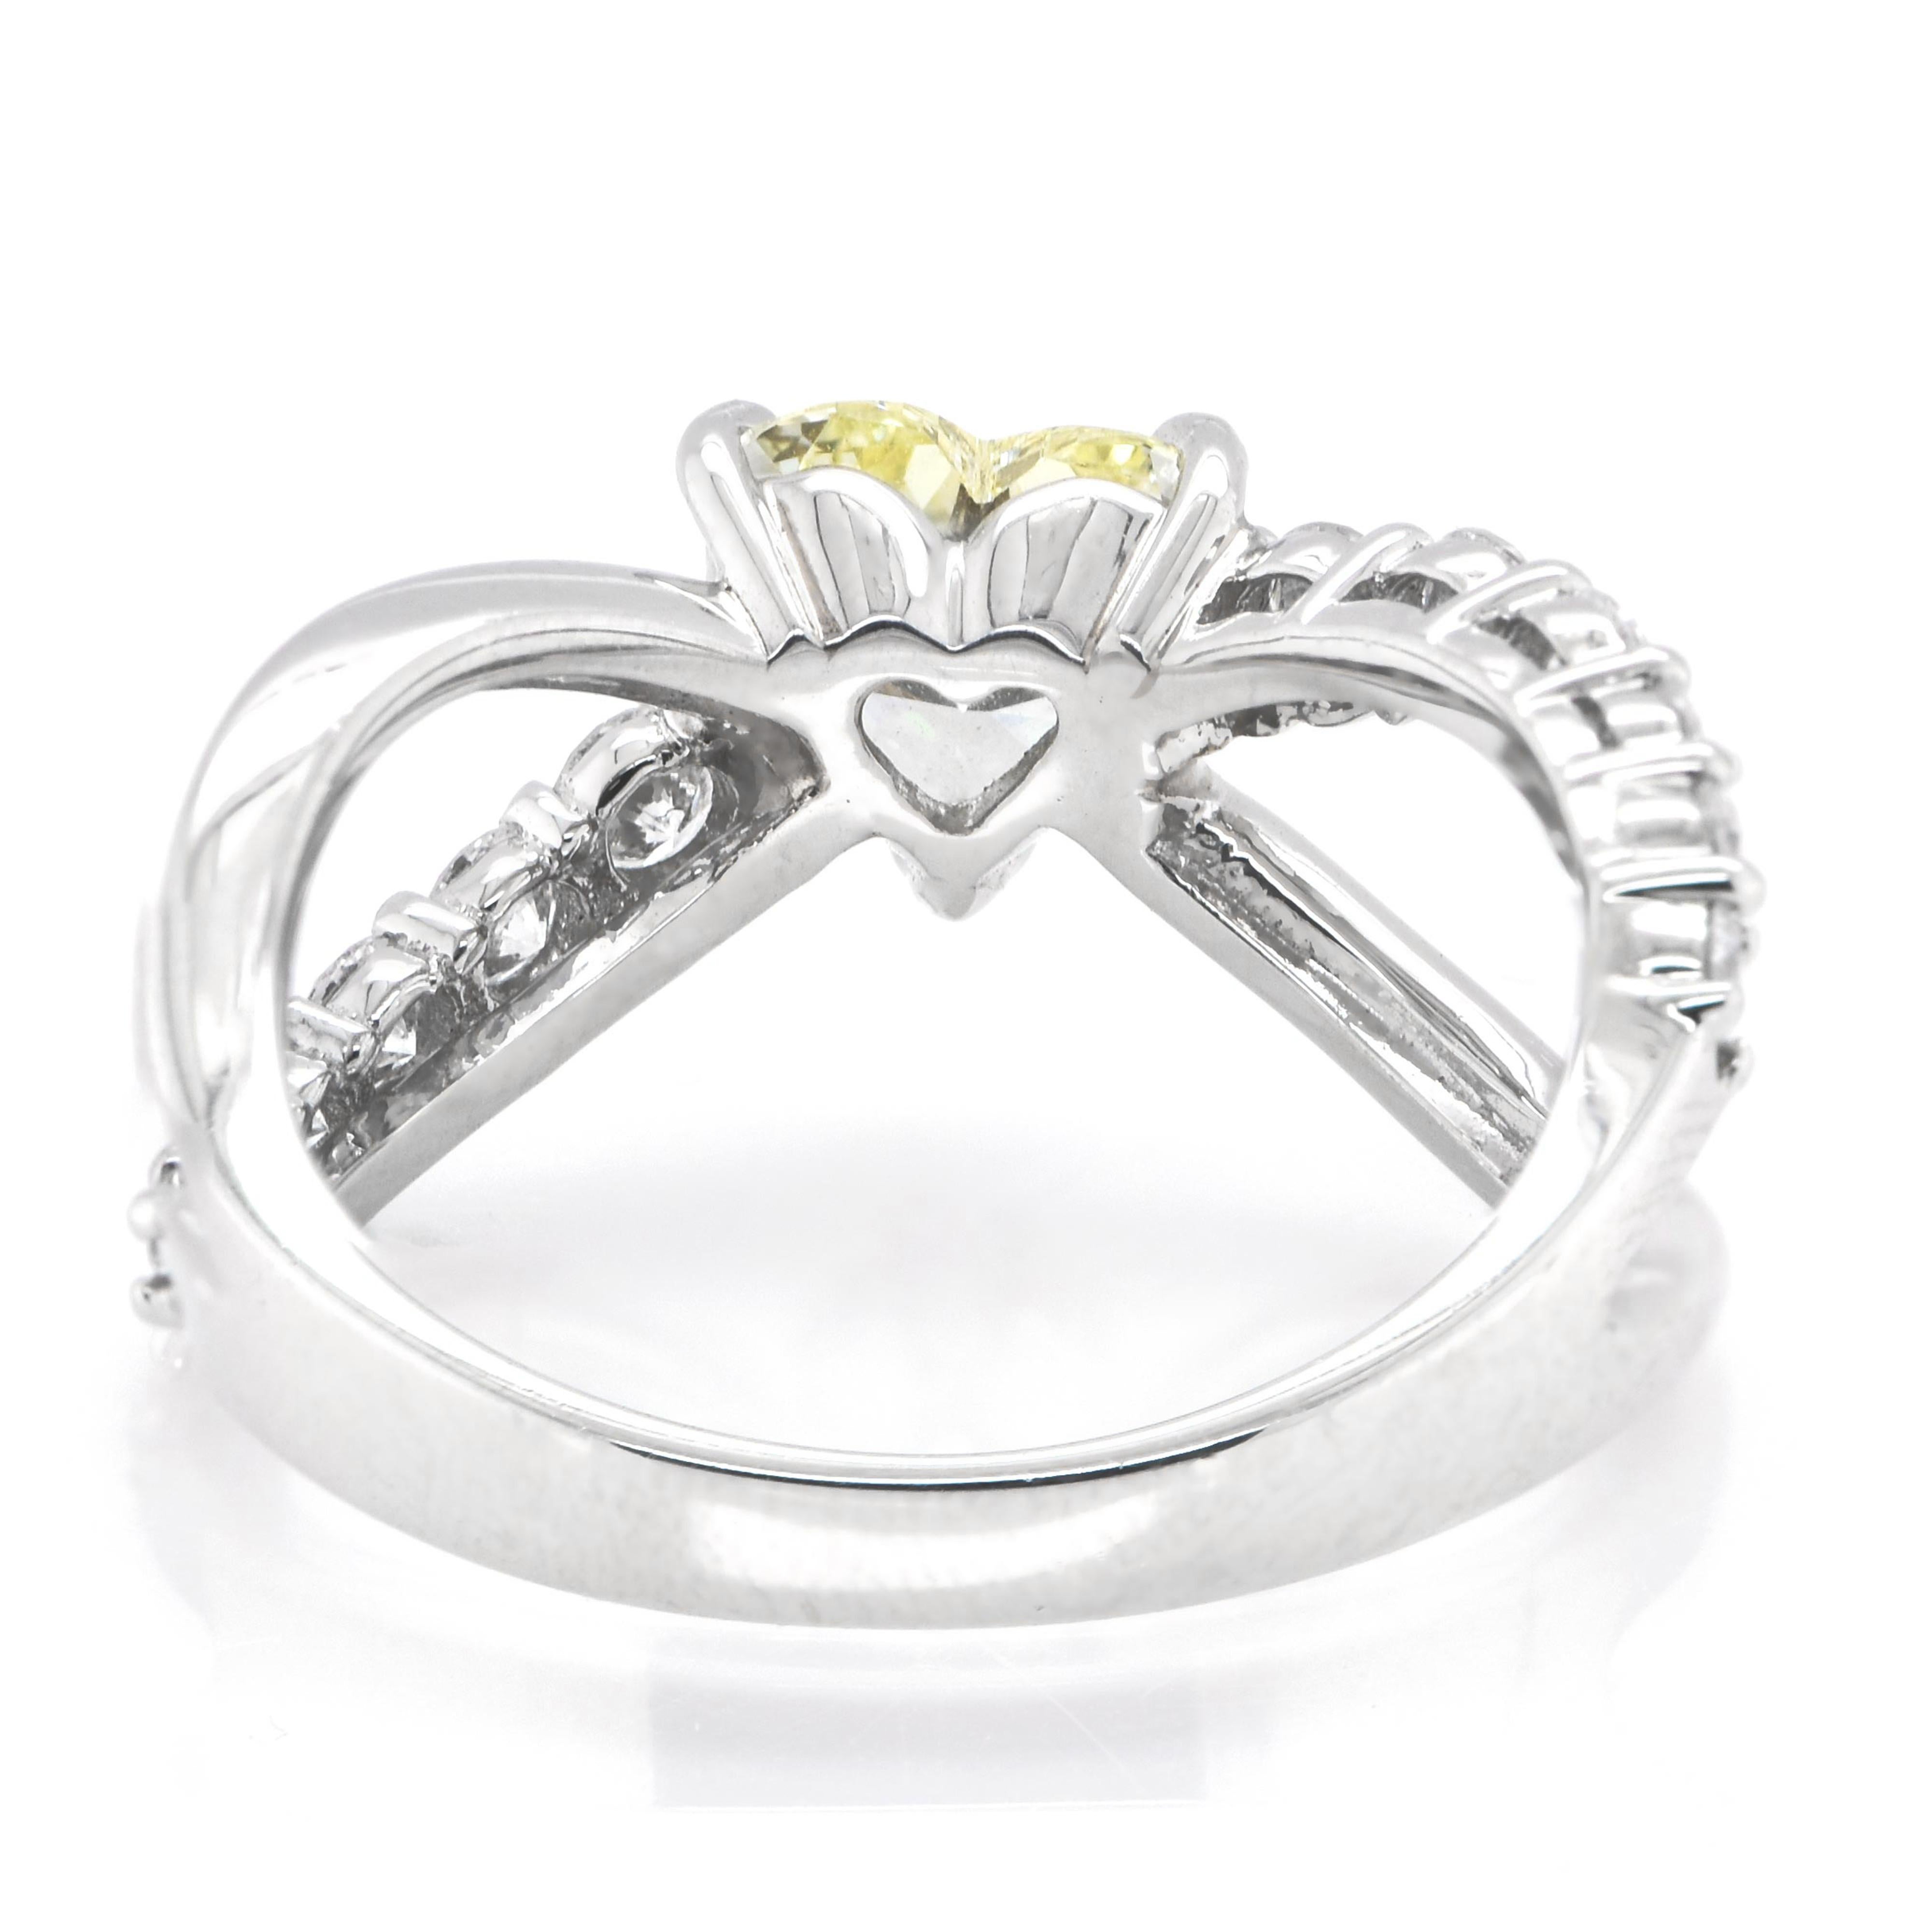 1.09 Carat Natural, Light Yellow VS-2 Heart-Cut Diamond Ring Set in Platinum In New Condition For Sale In Tokyo, JP